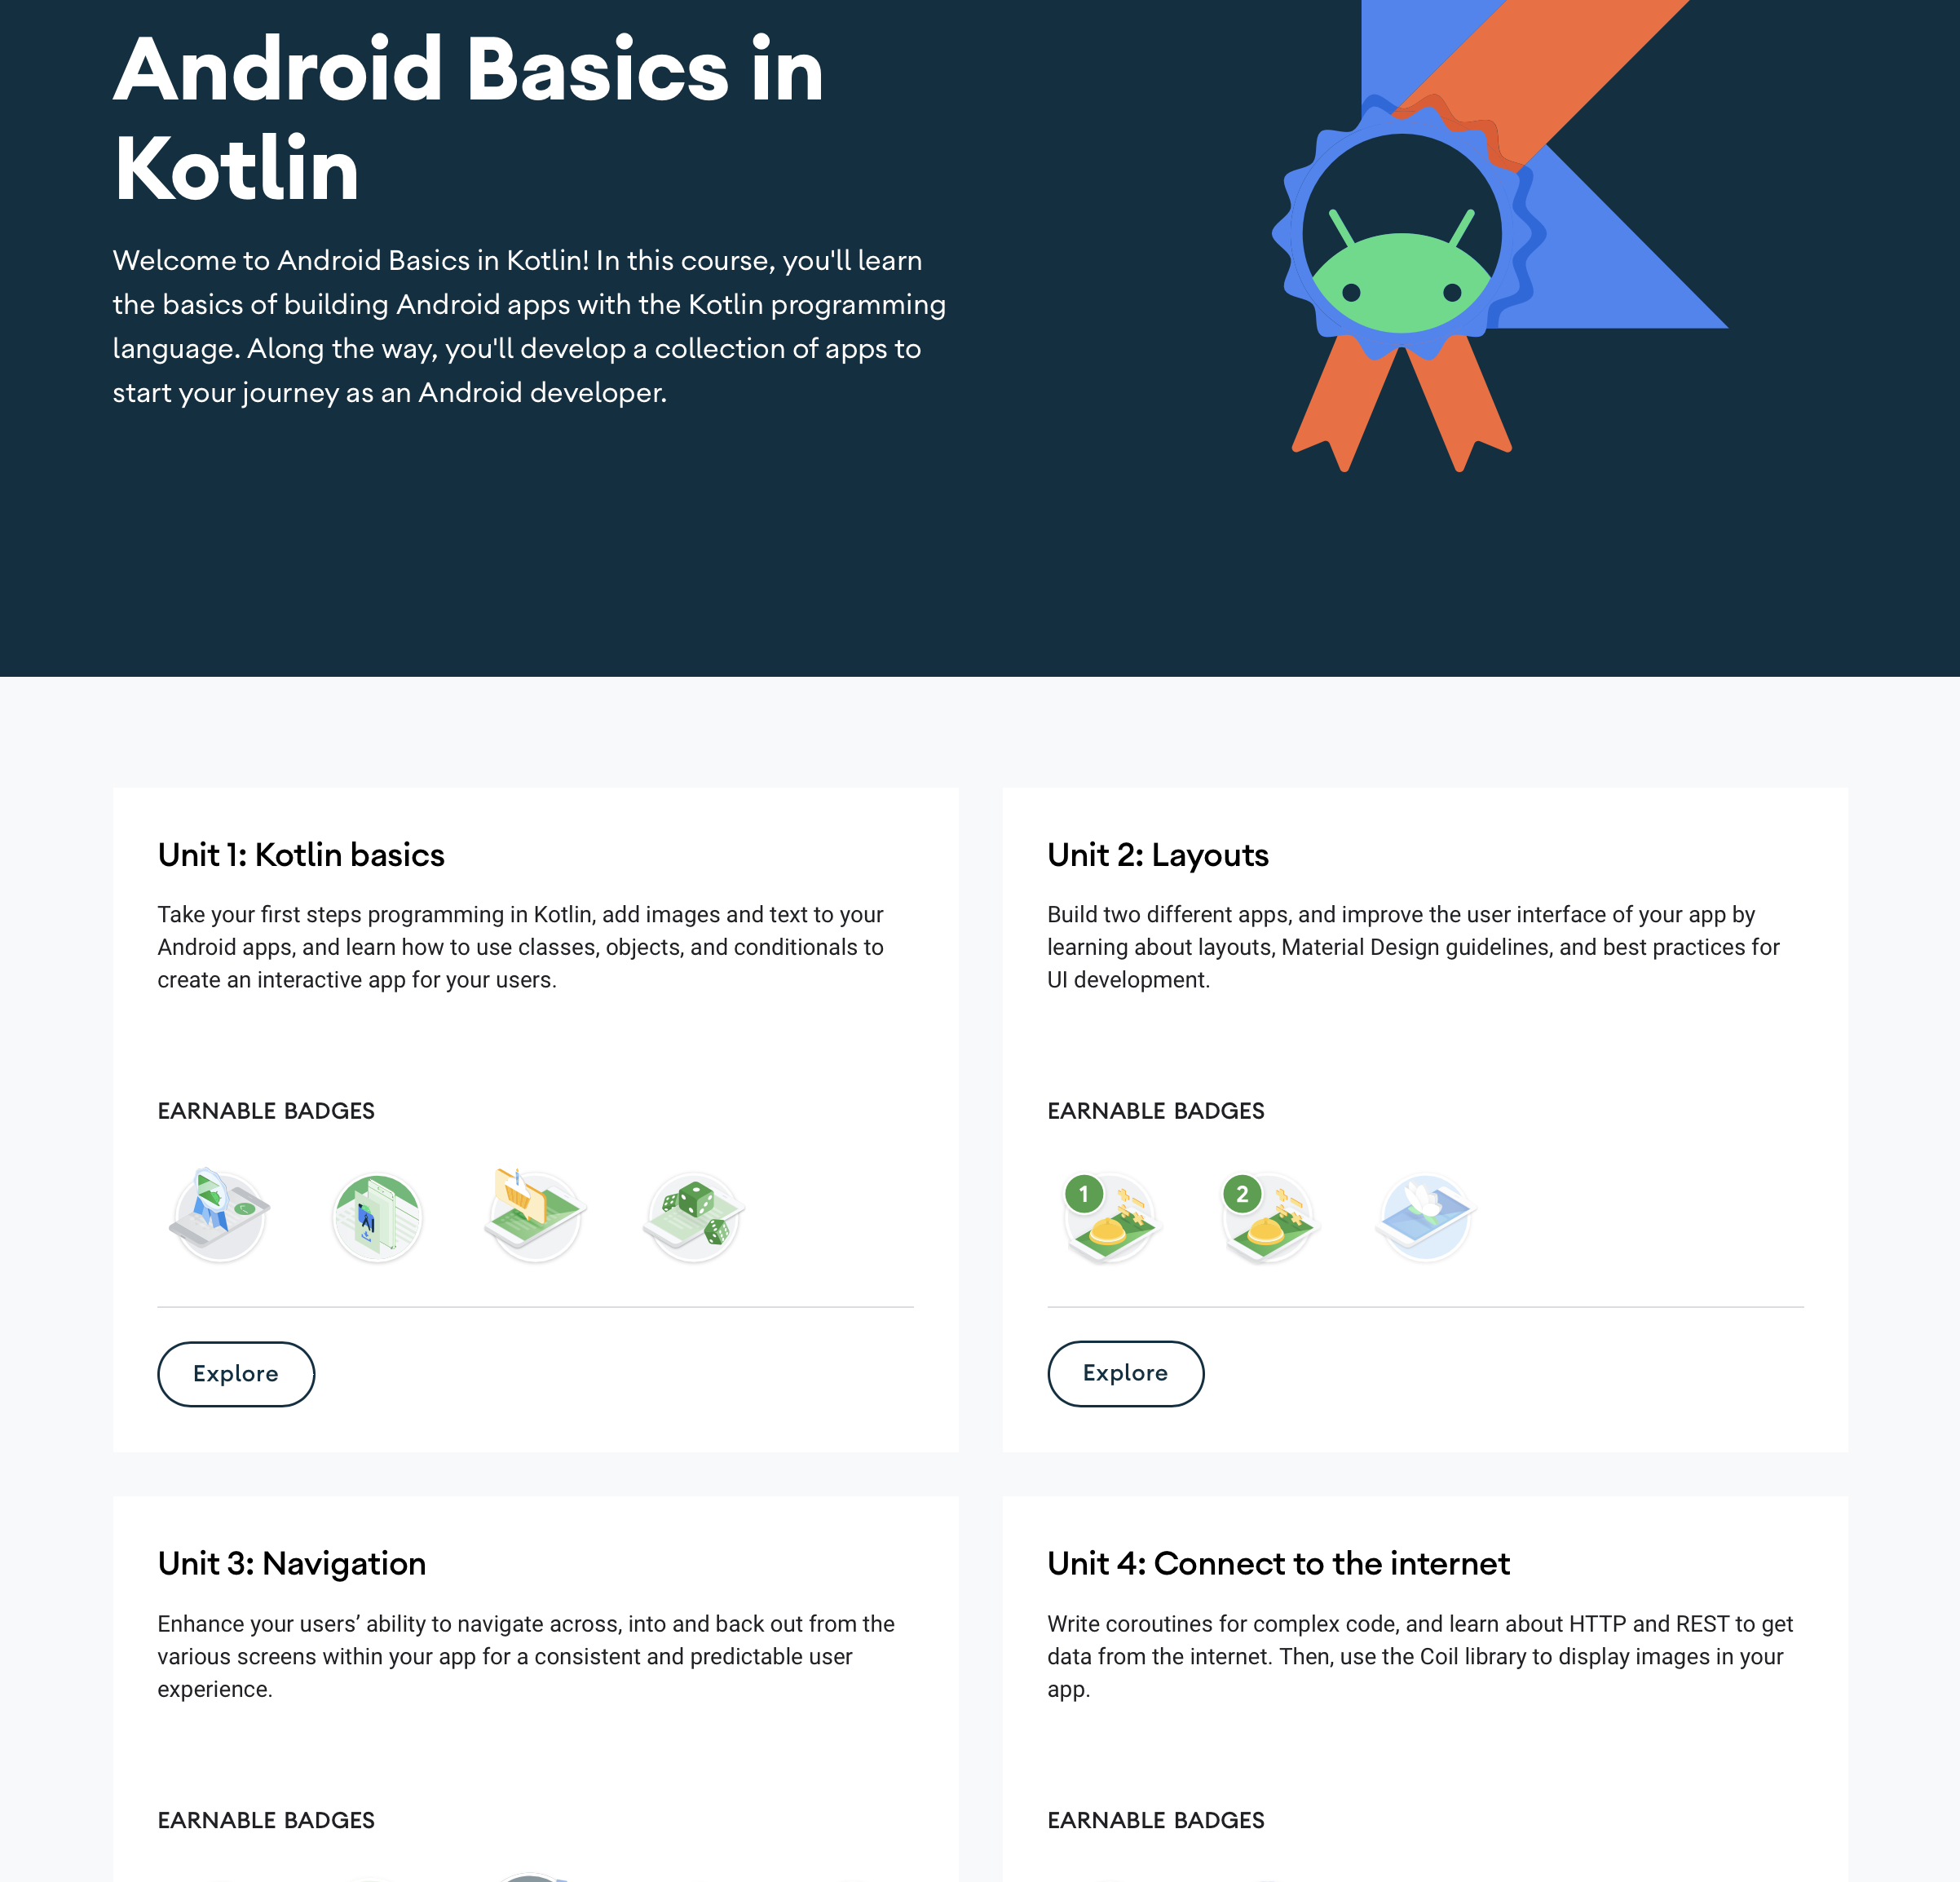 Screenshot of the "Android Basics in Kotlin" course page showing several course units, with more cropped at the bottom, intended to show how comprehensive the course is.